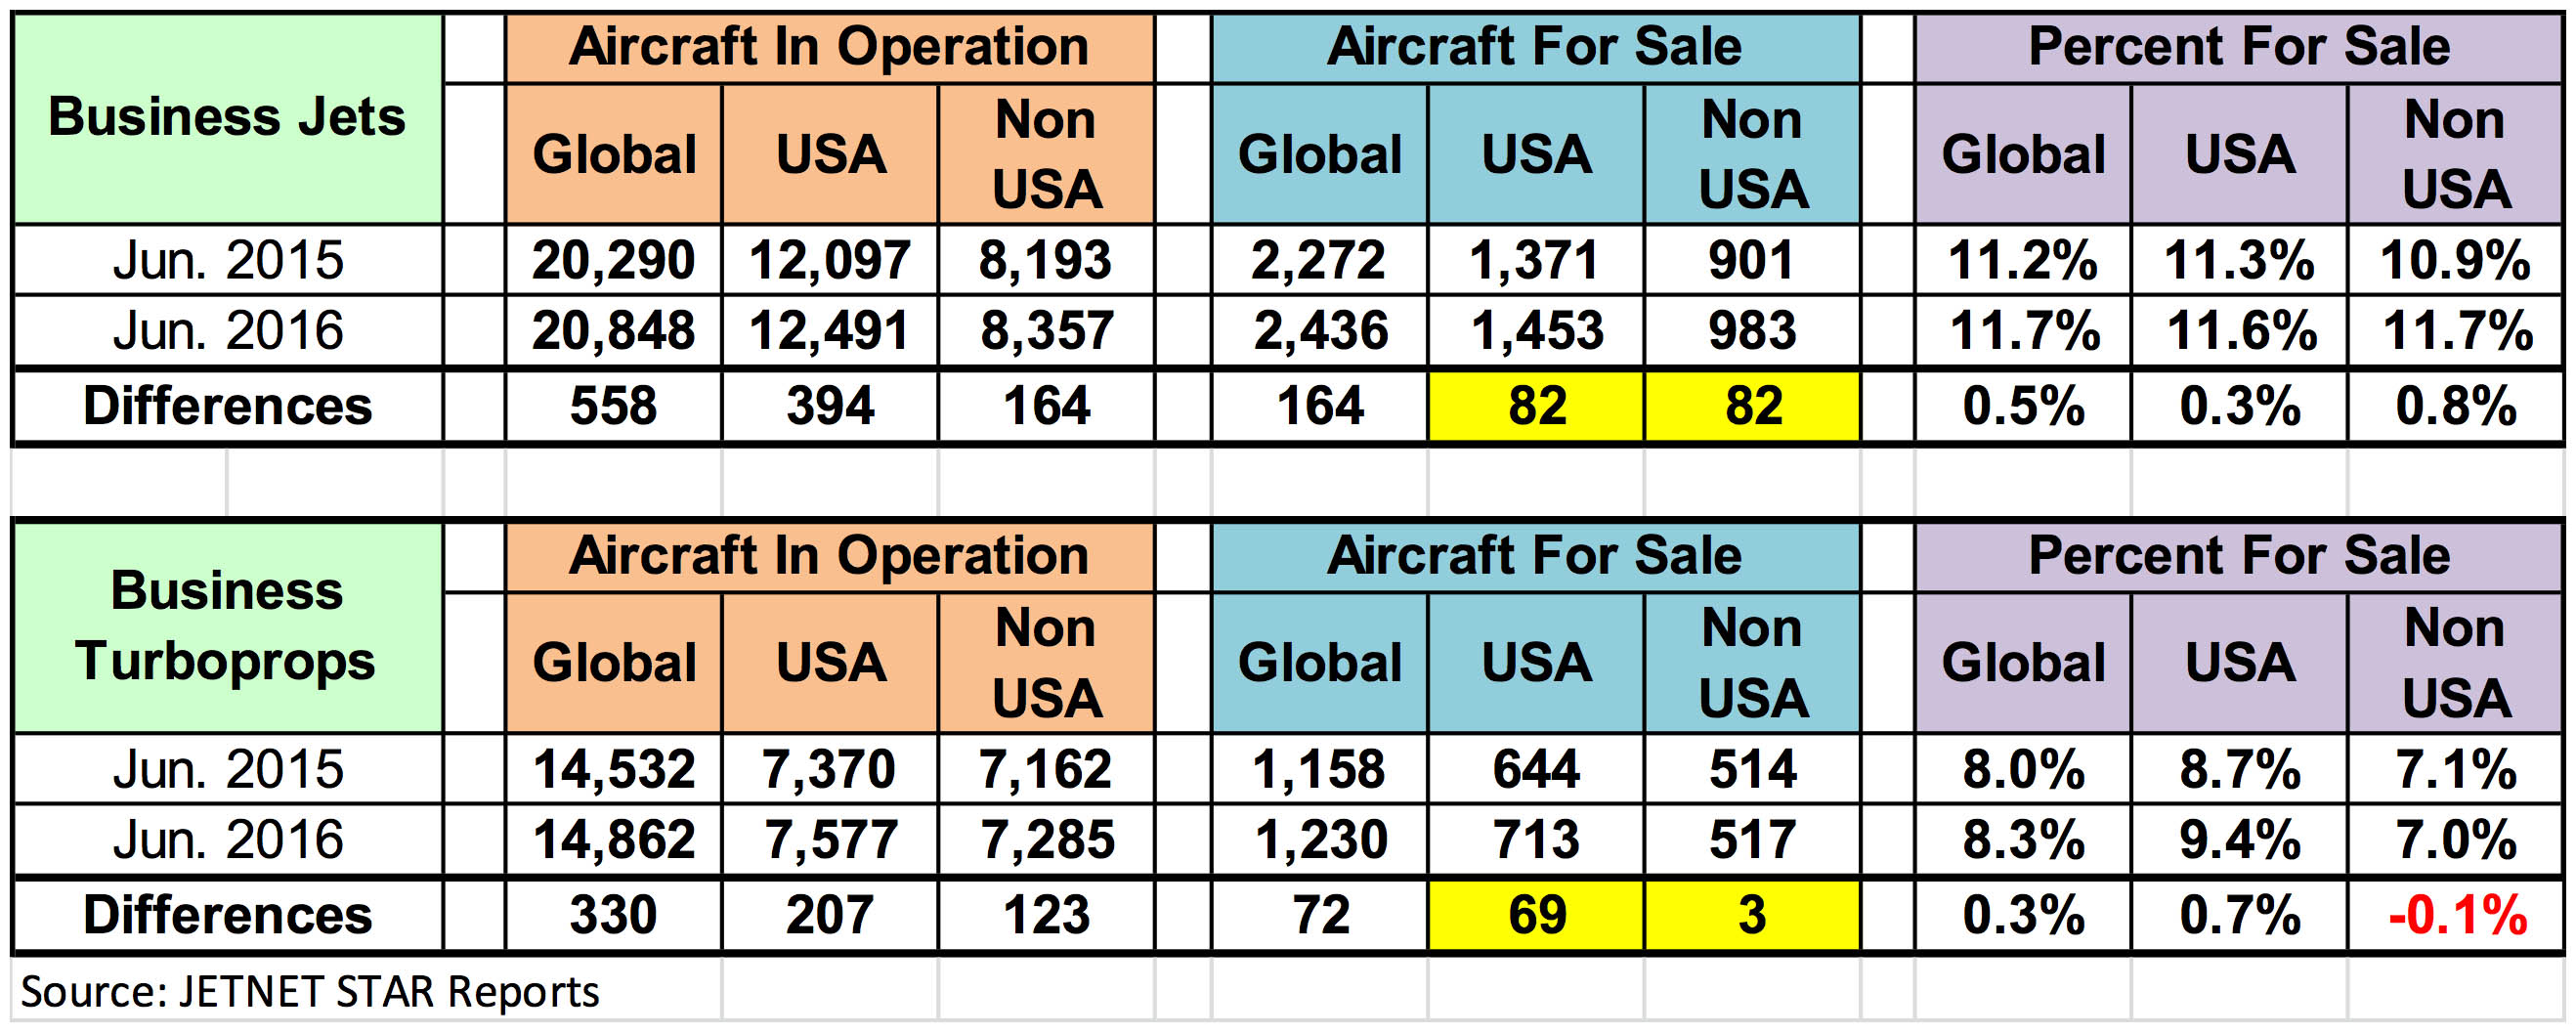 Table B - Business Jets, Business Turboprops; US vs. Non-US